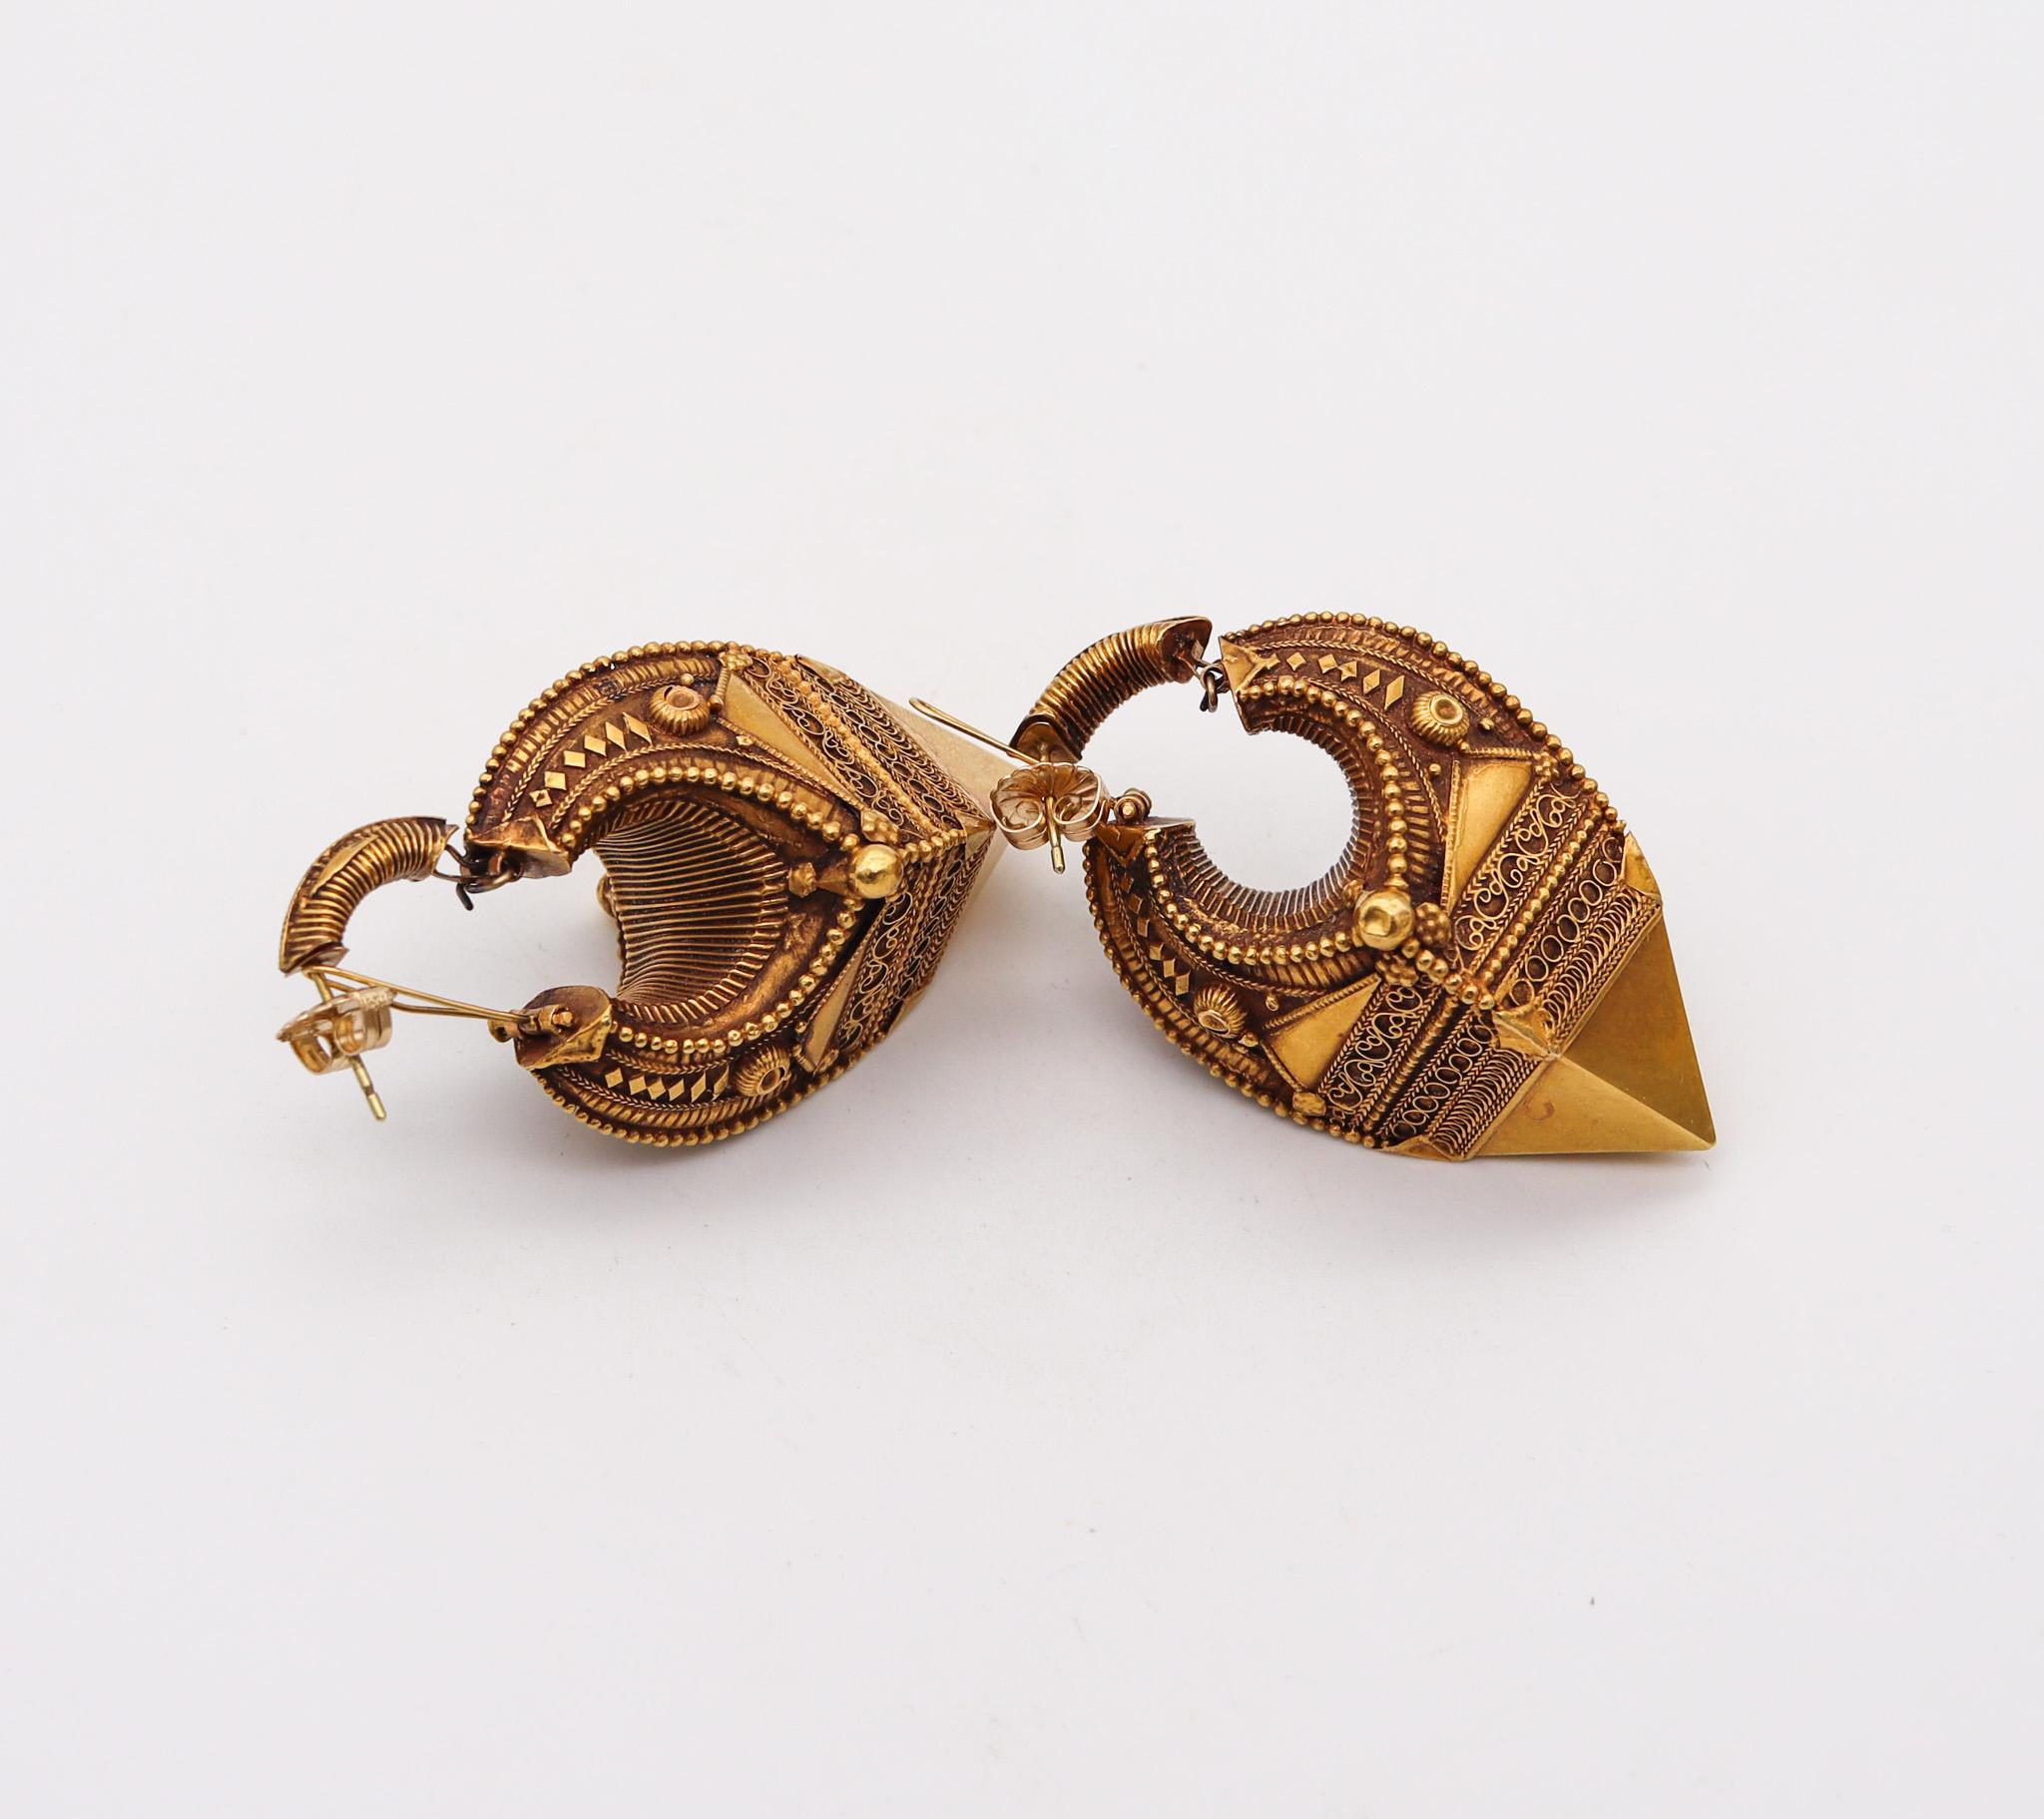 Southern India 19th Century Antique Dangle Drop Earrings In 22Kt Yellow Gold In Excellent Condition For Sale In Miami, FL